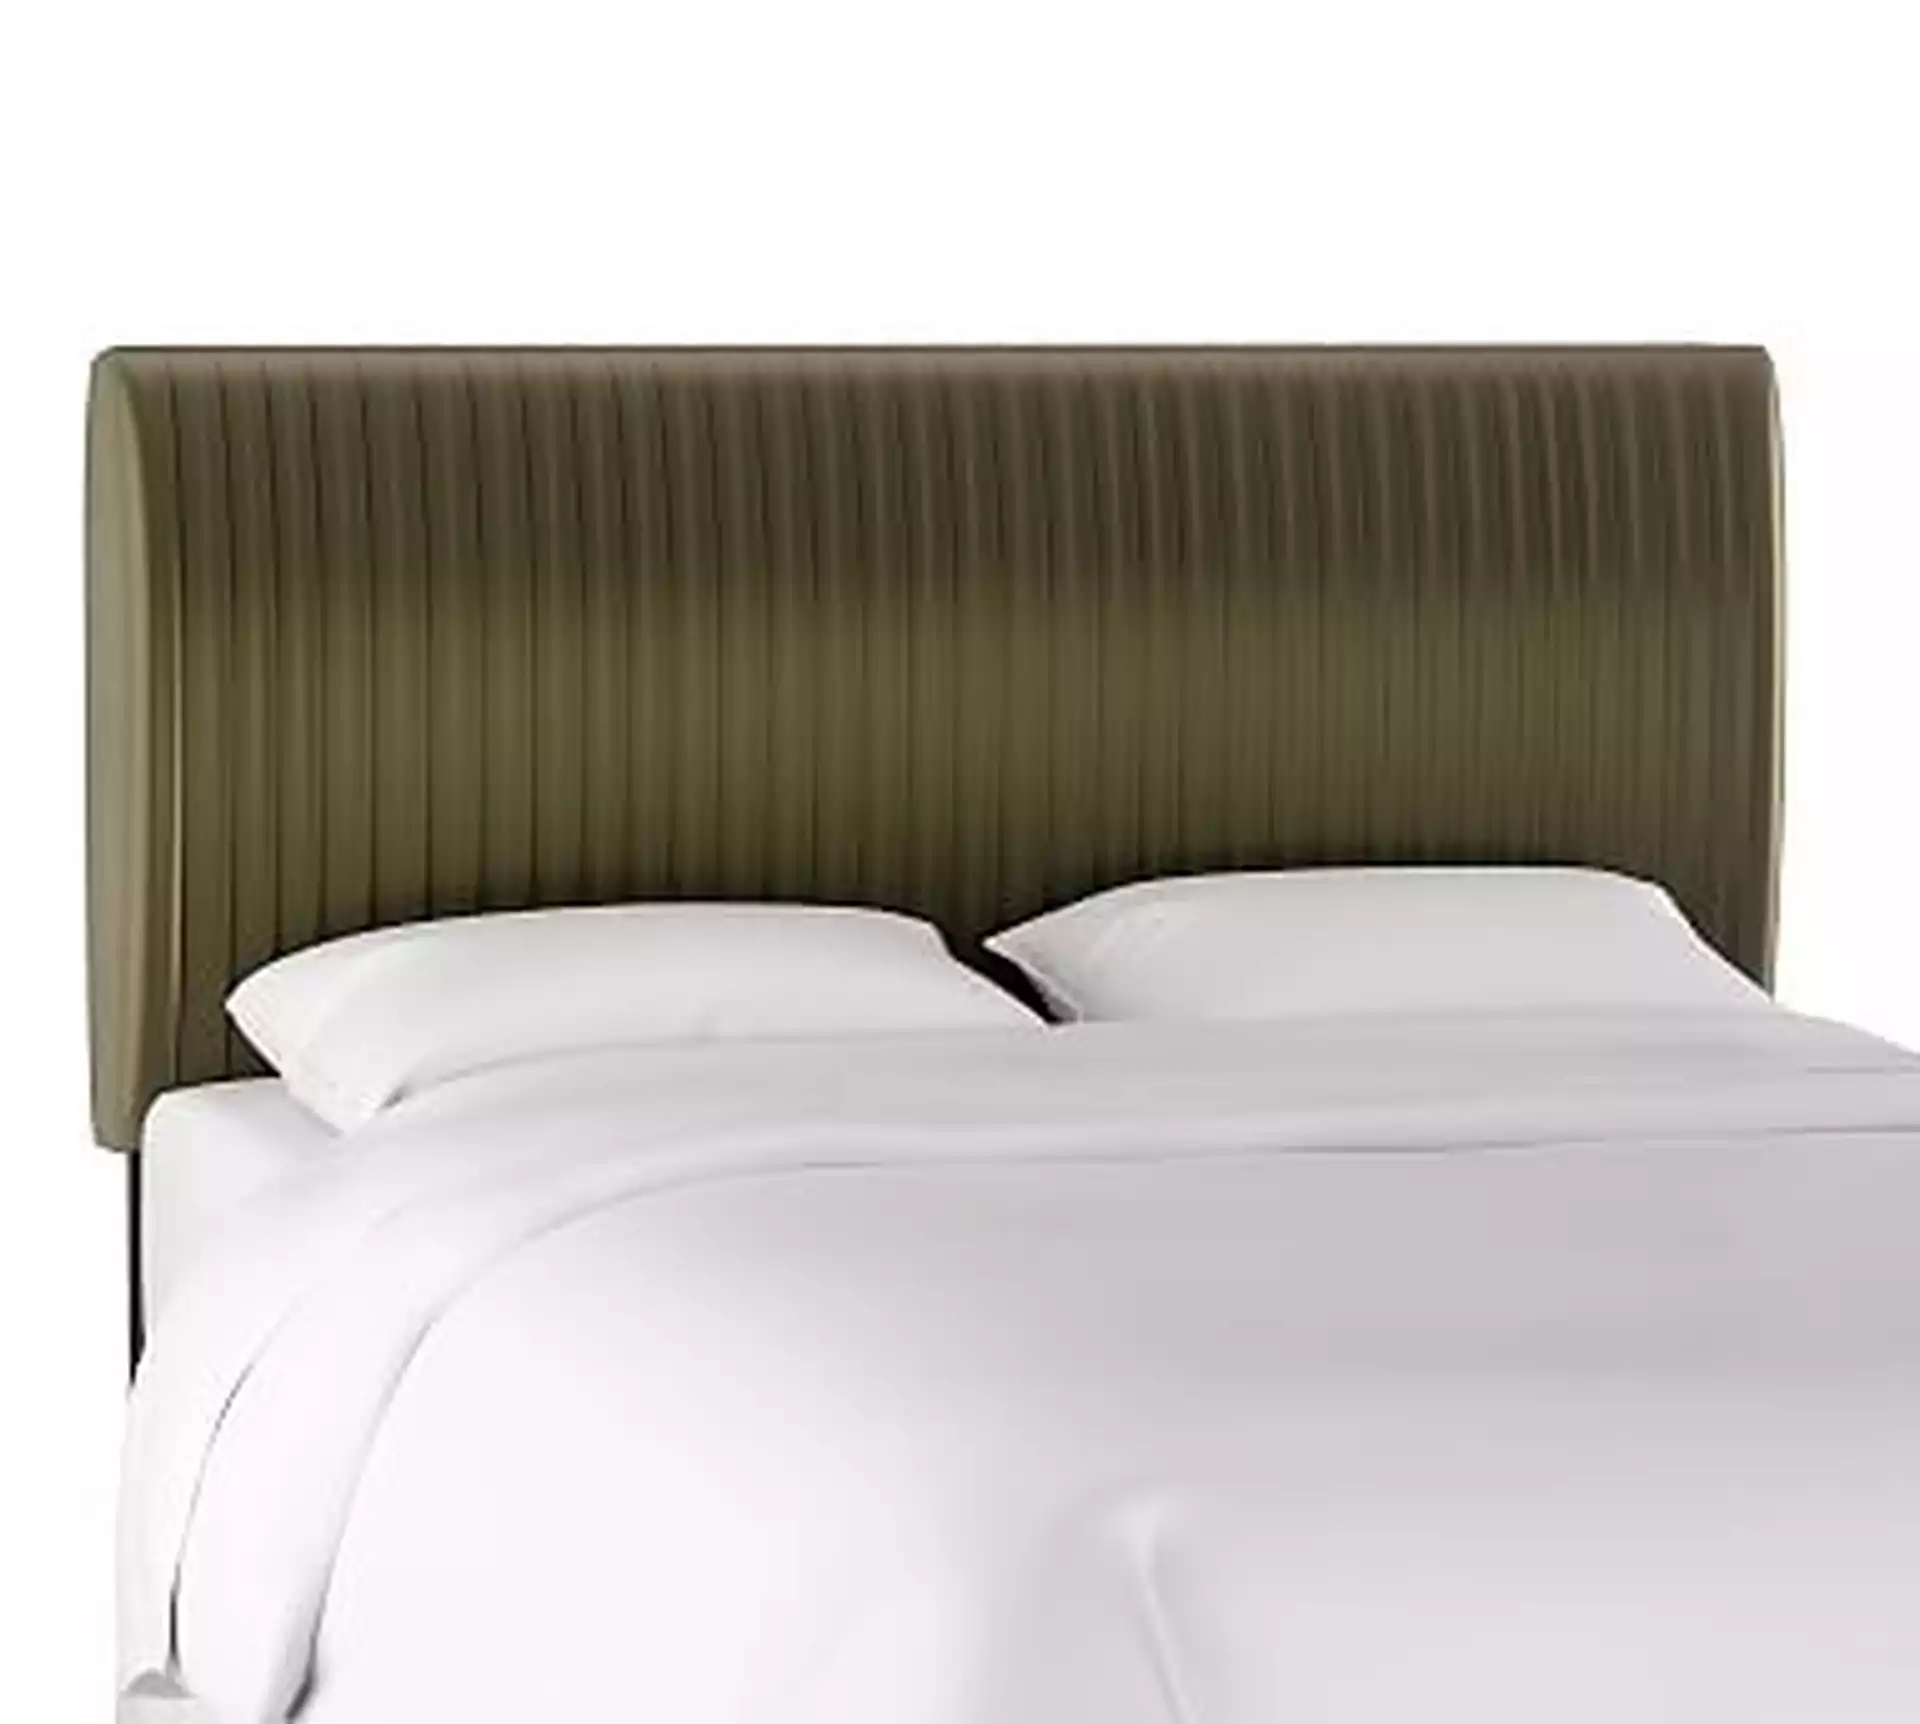 Kendall Channel Tufted Headboard, Queen, Olive